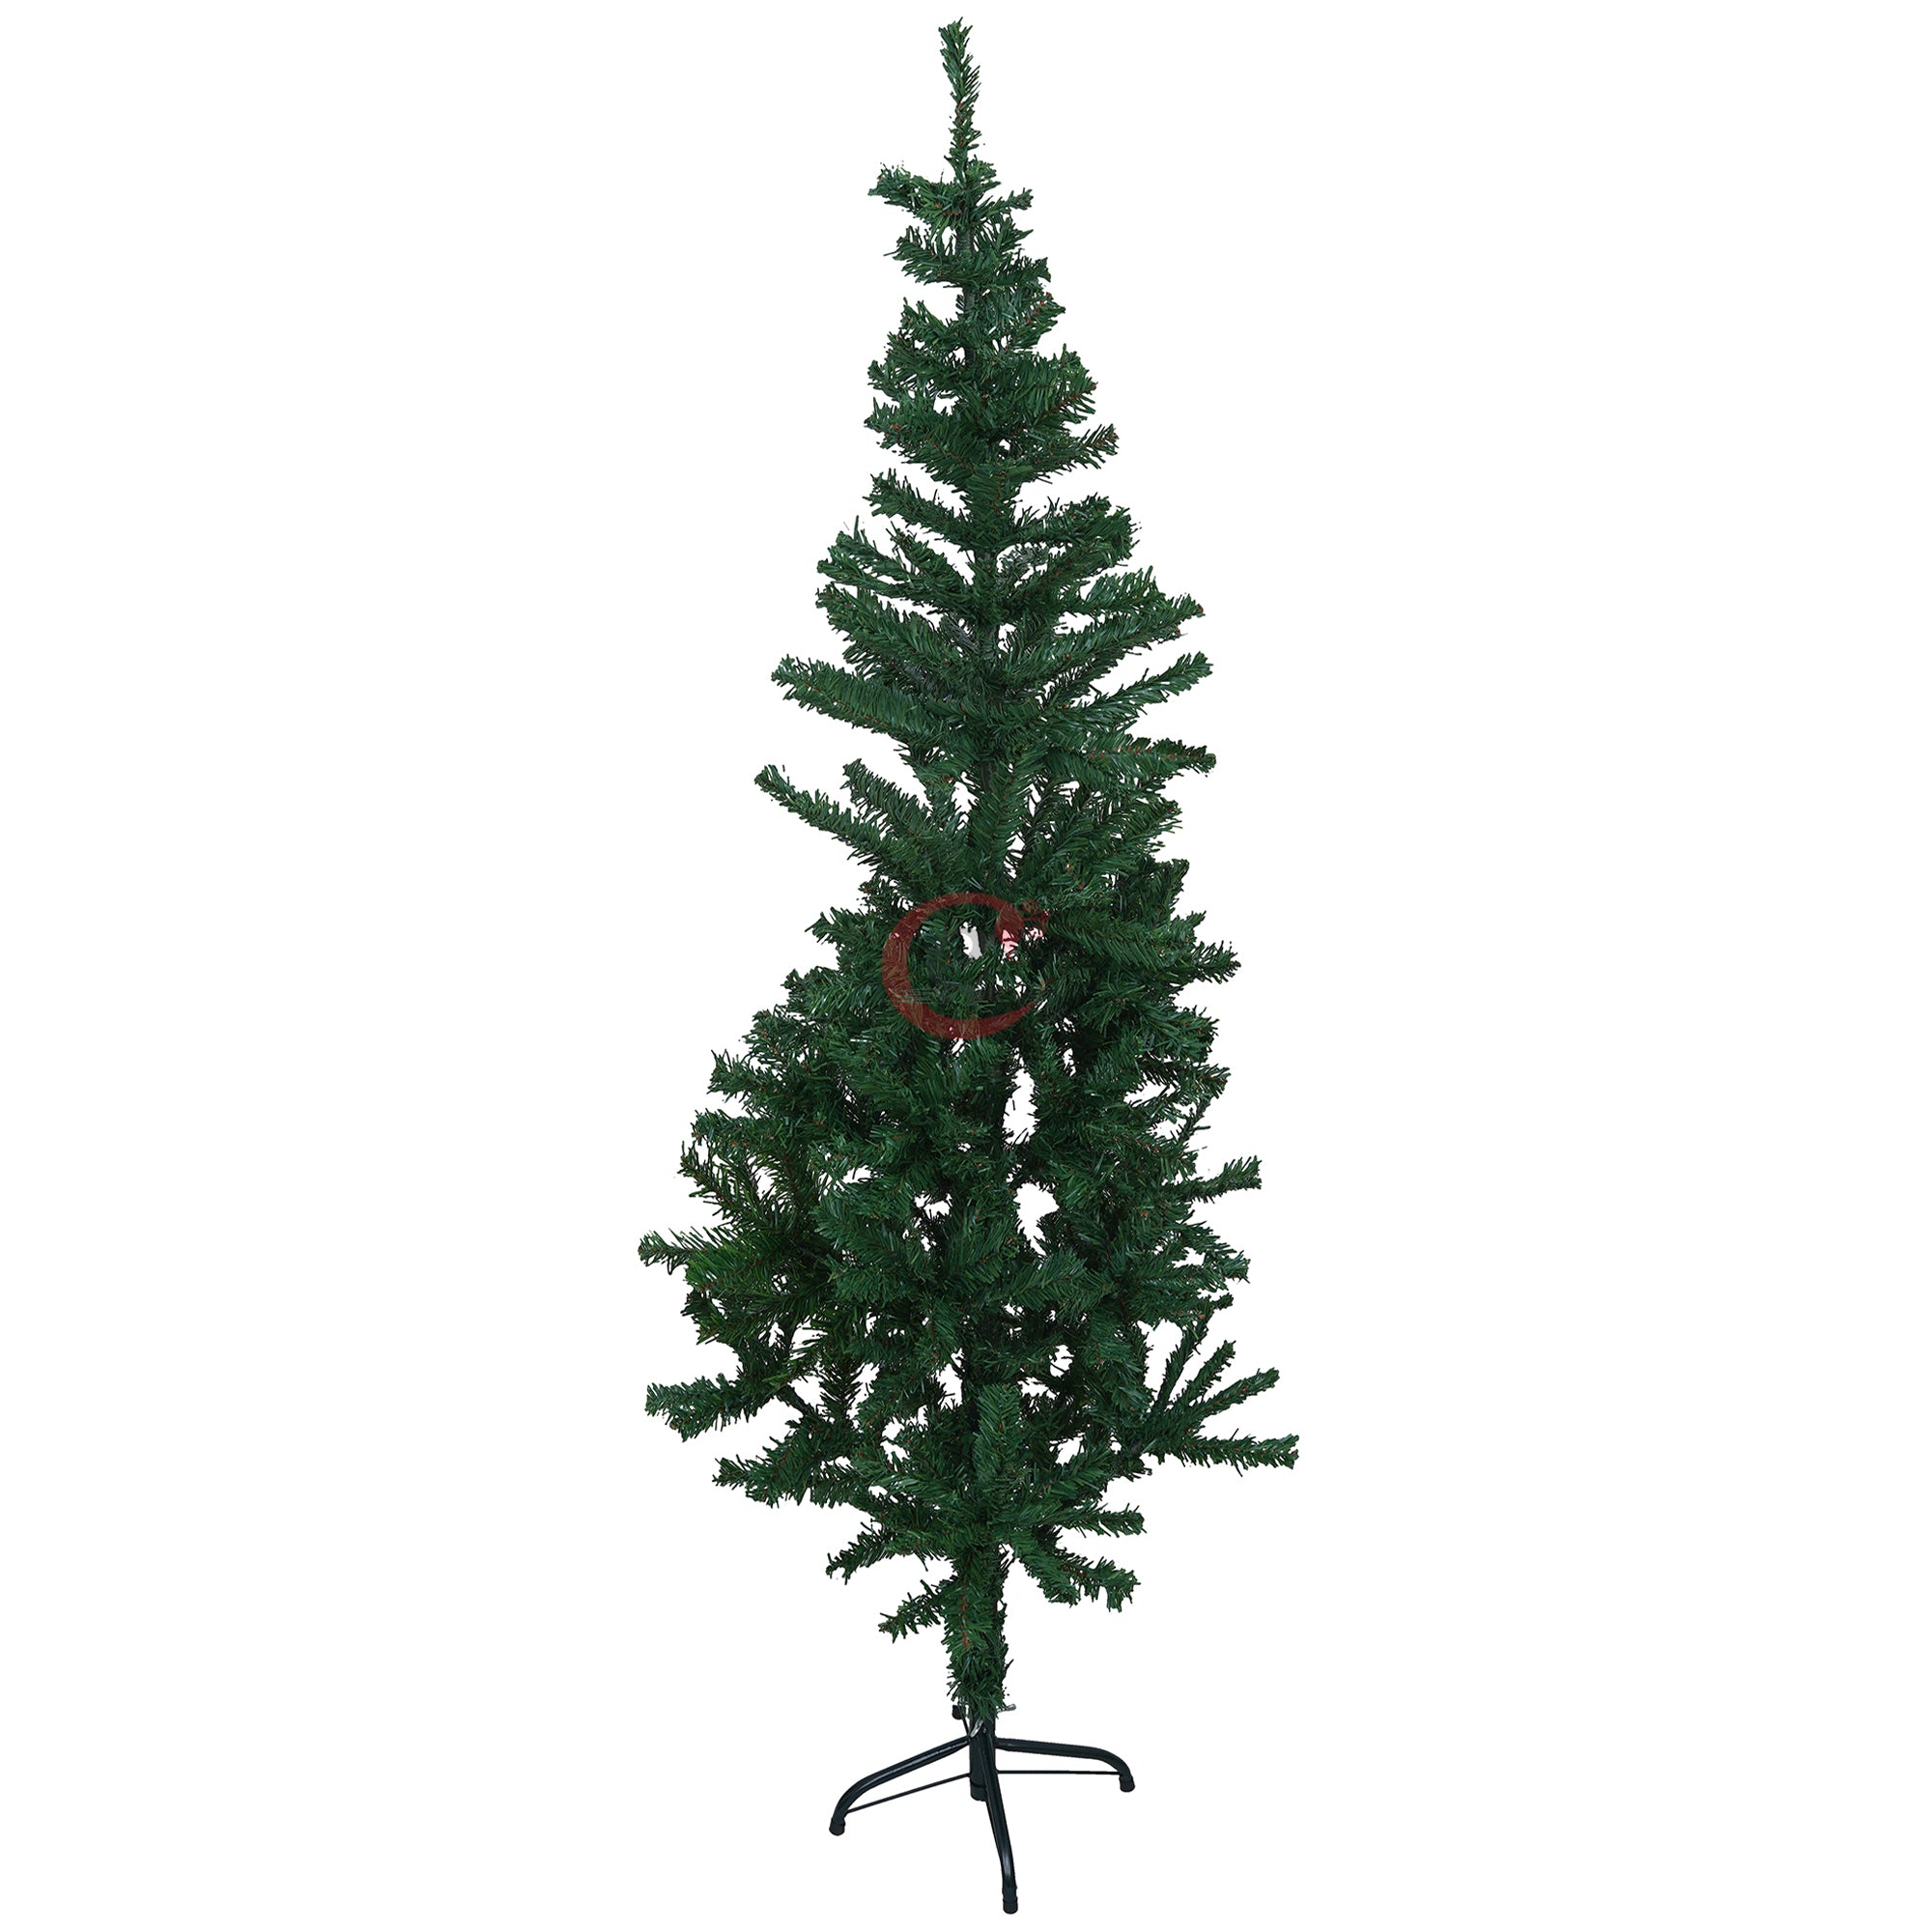 eCraftIndia 6 Feet Green Artificial Christmas Tree Xmas Pine Tree with Metal Stand - Xmas Tree for Indoor, Outdoor, Home, Living Room, Office, Church Decor - Merry Christmas Decoration Item 6